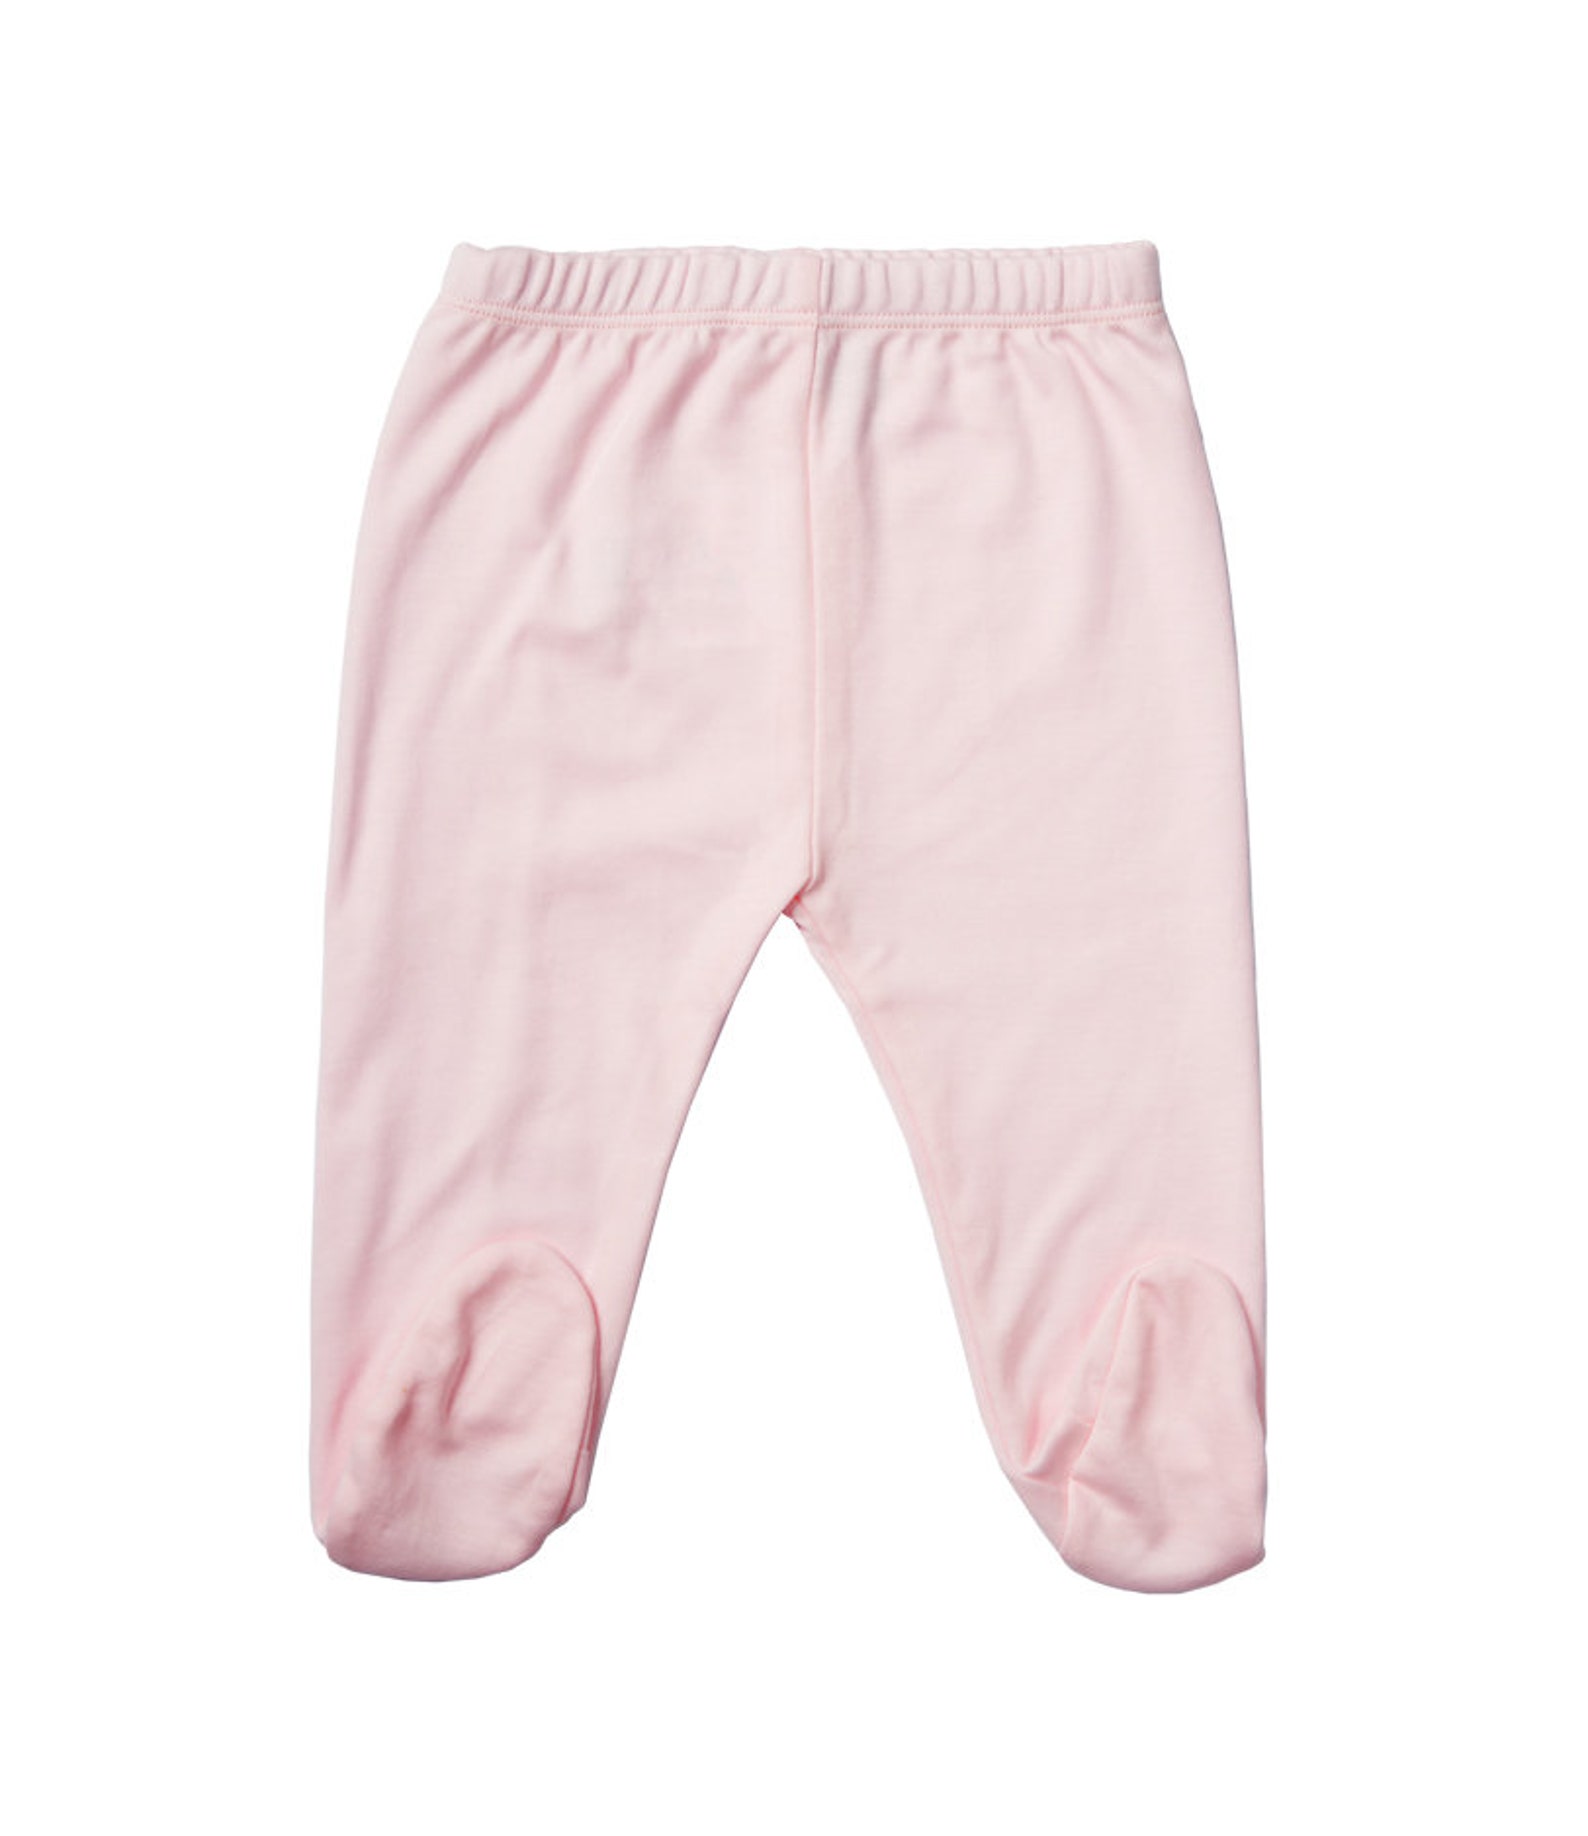 Pink Footed Pants Pima Baby Footed Pant 100% Pima Cotton Baby Pants ...